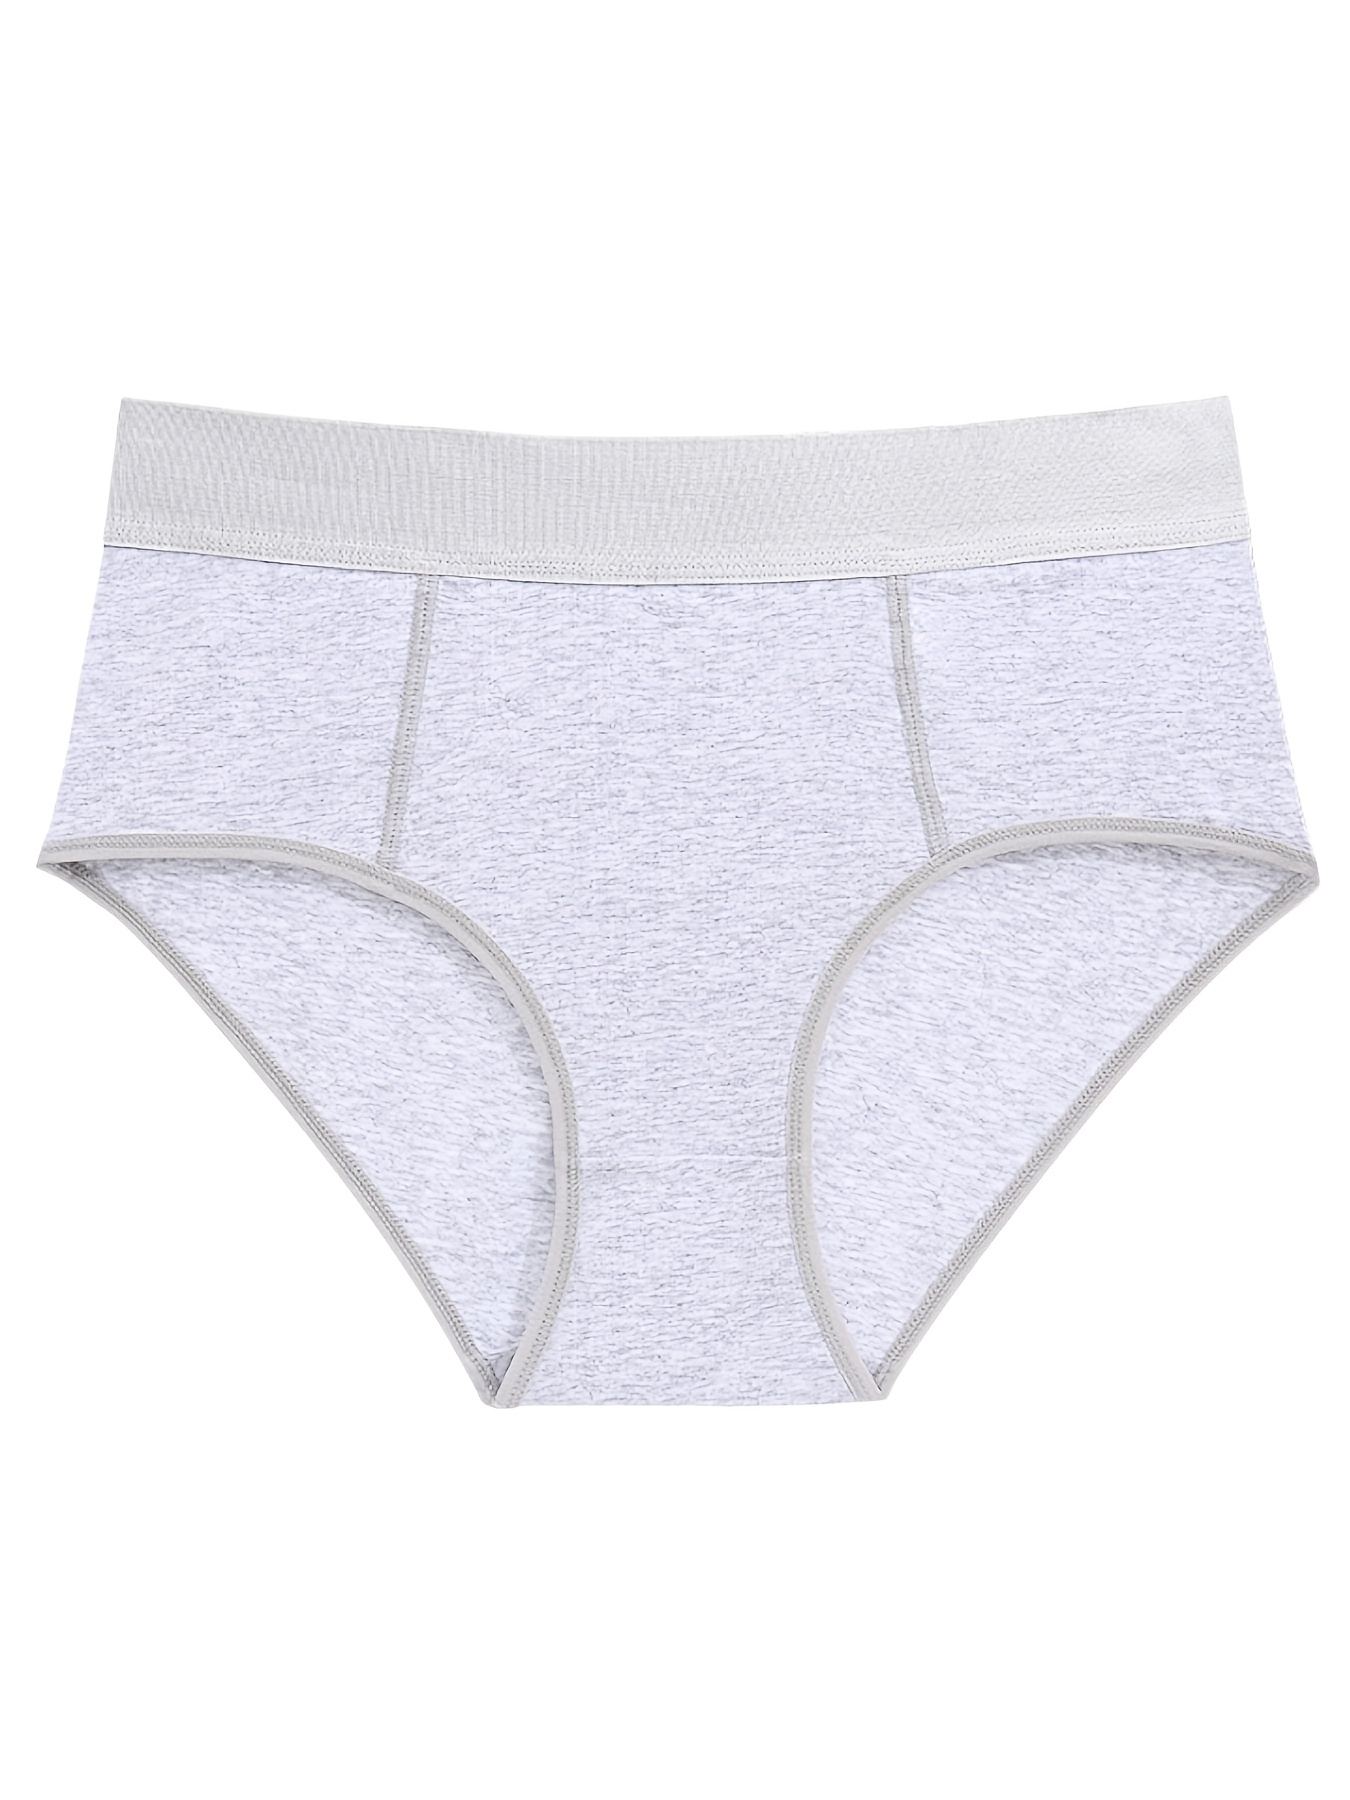 1 pcs Colorful Striped High Cut Women's Underwear - Breathable and  Quick-Drying Sports Panties